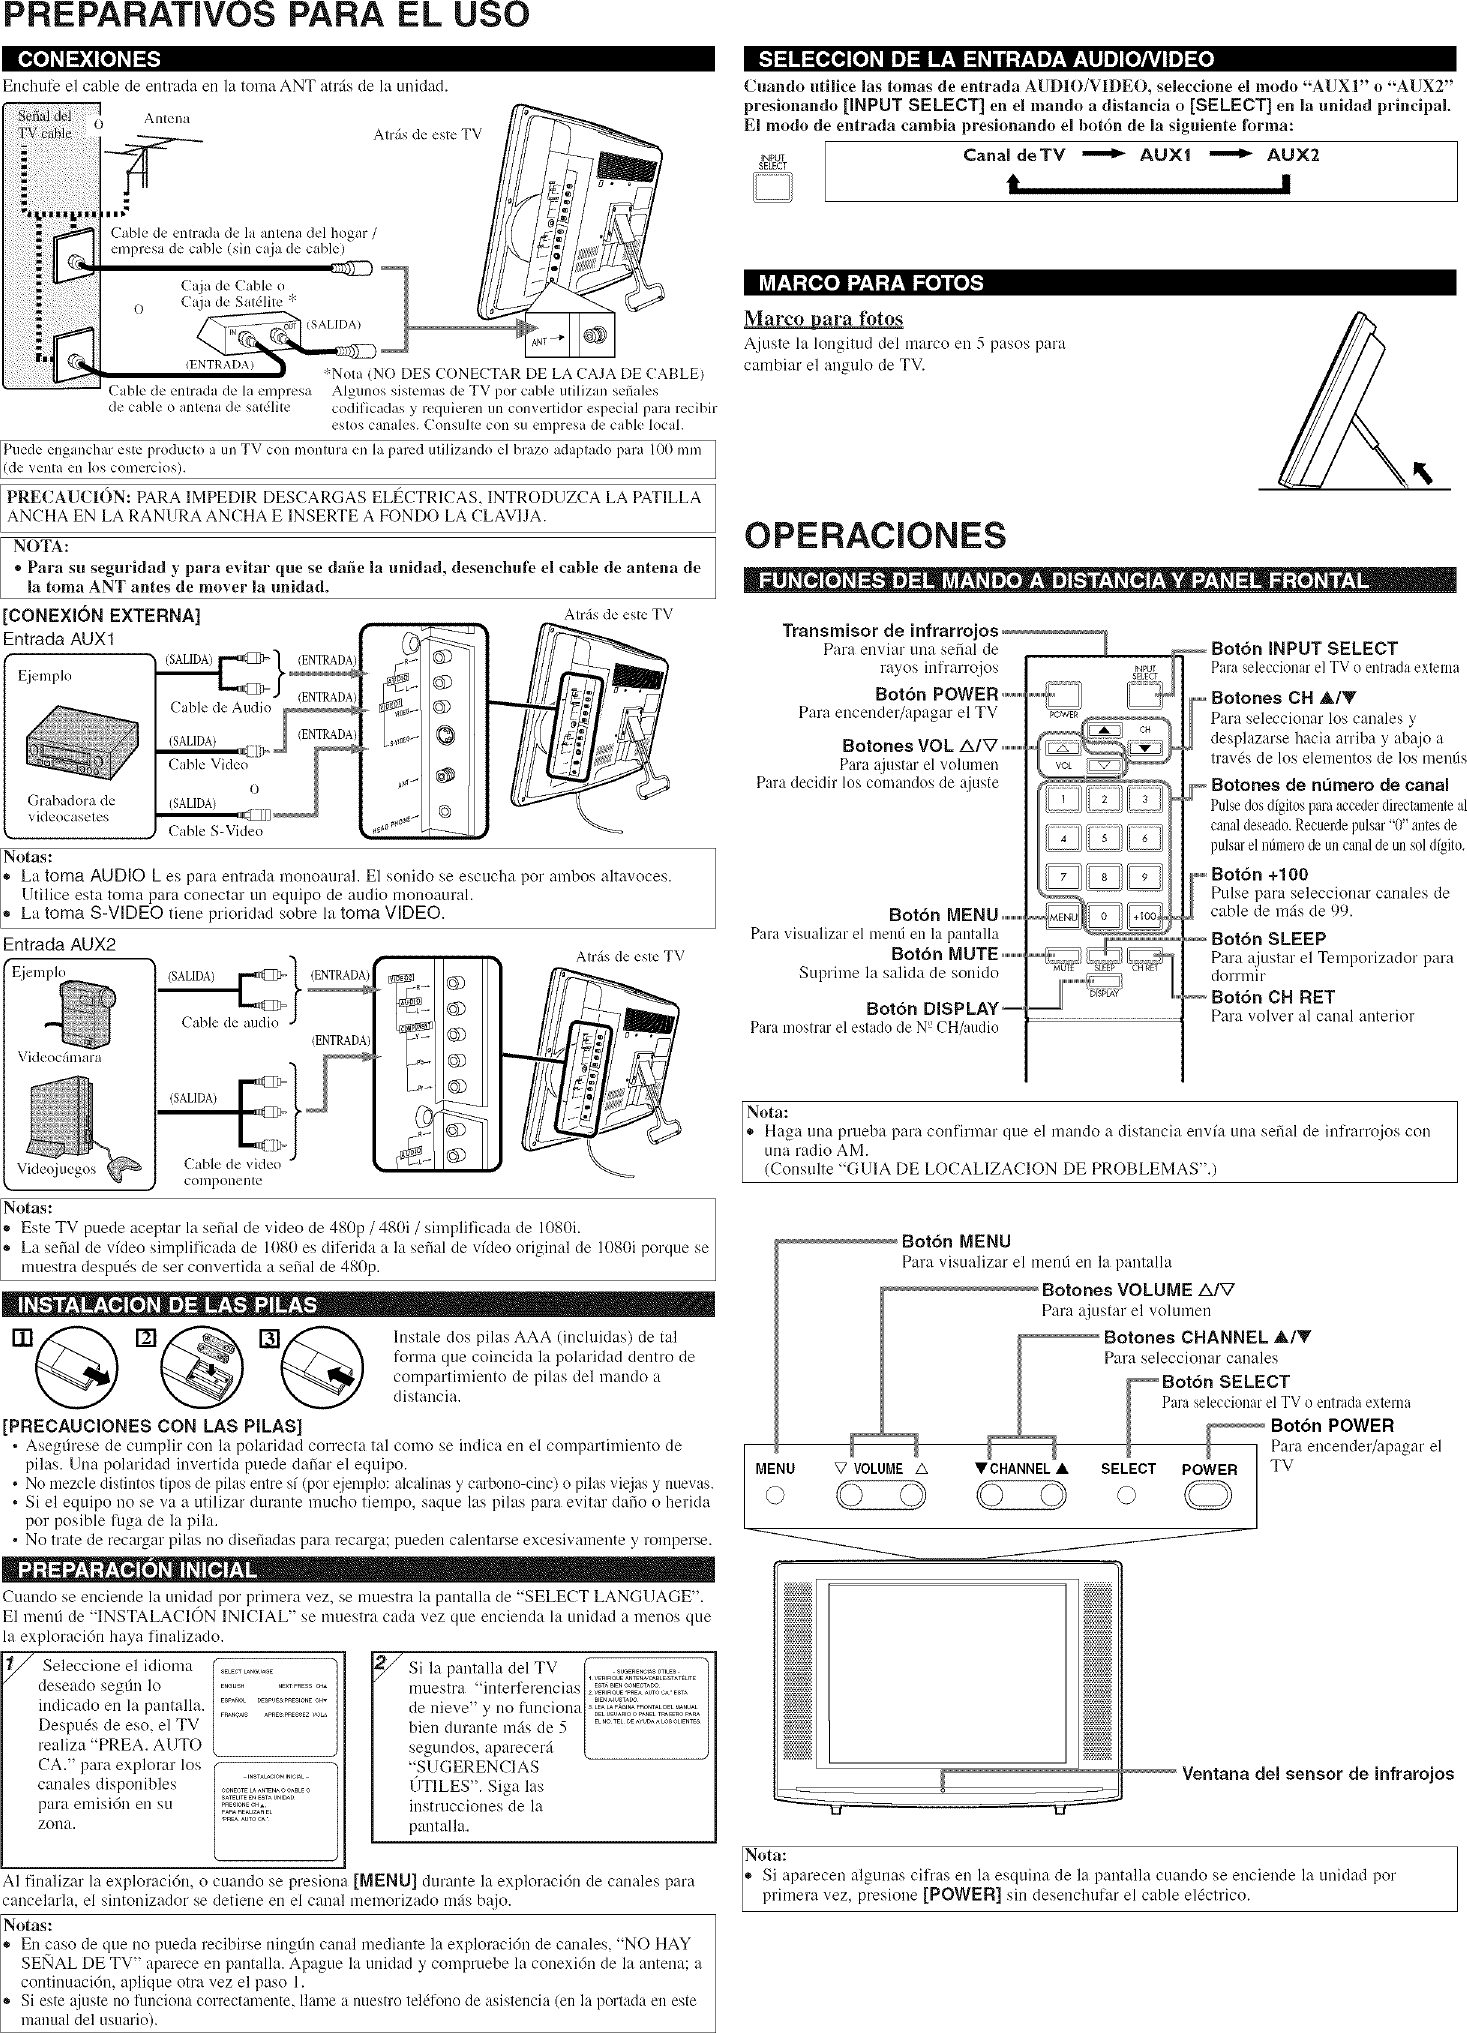 Page 6 of 8 - Sylvania 6615LCT User Manual  LCD TELEVISION - Manuals And Guides L0608636